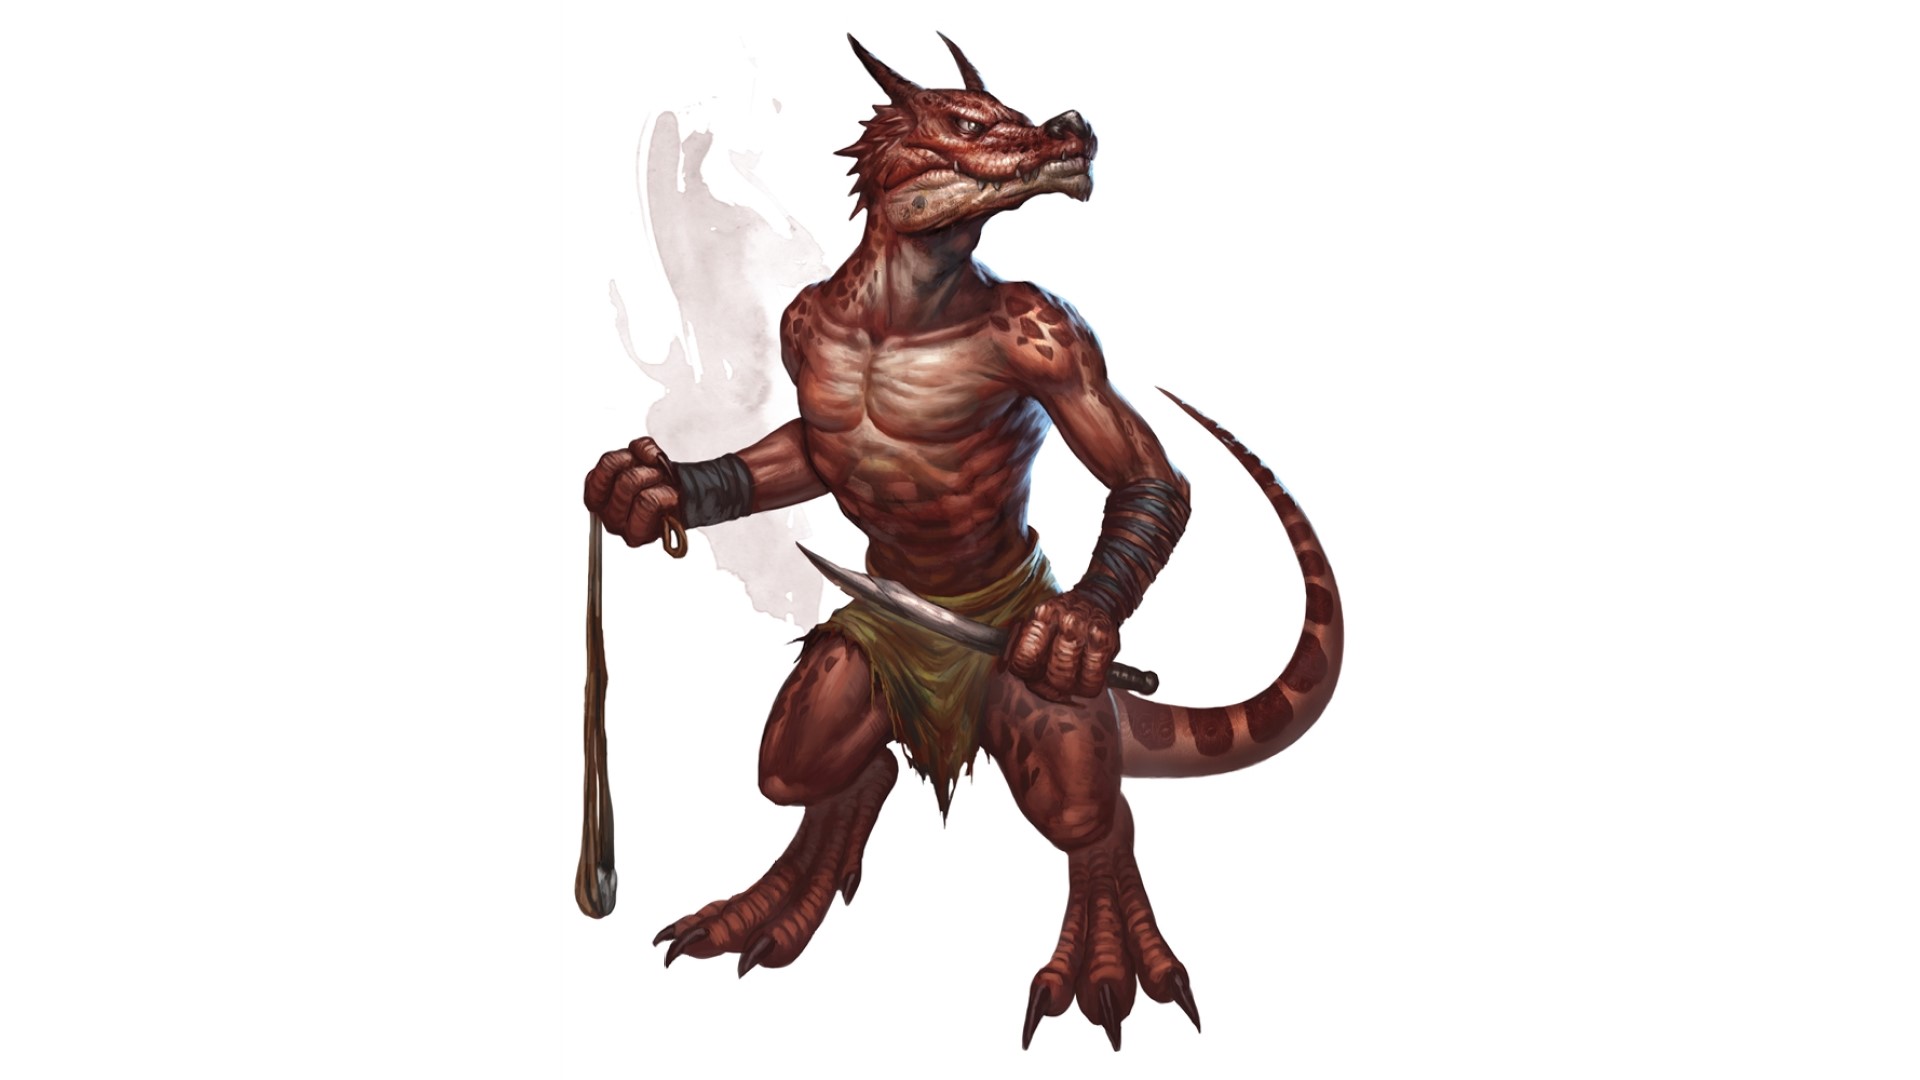 DnD Rogue 5e - Wizards of the Coast artwork showing a Kobold armed with a sling